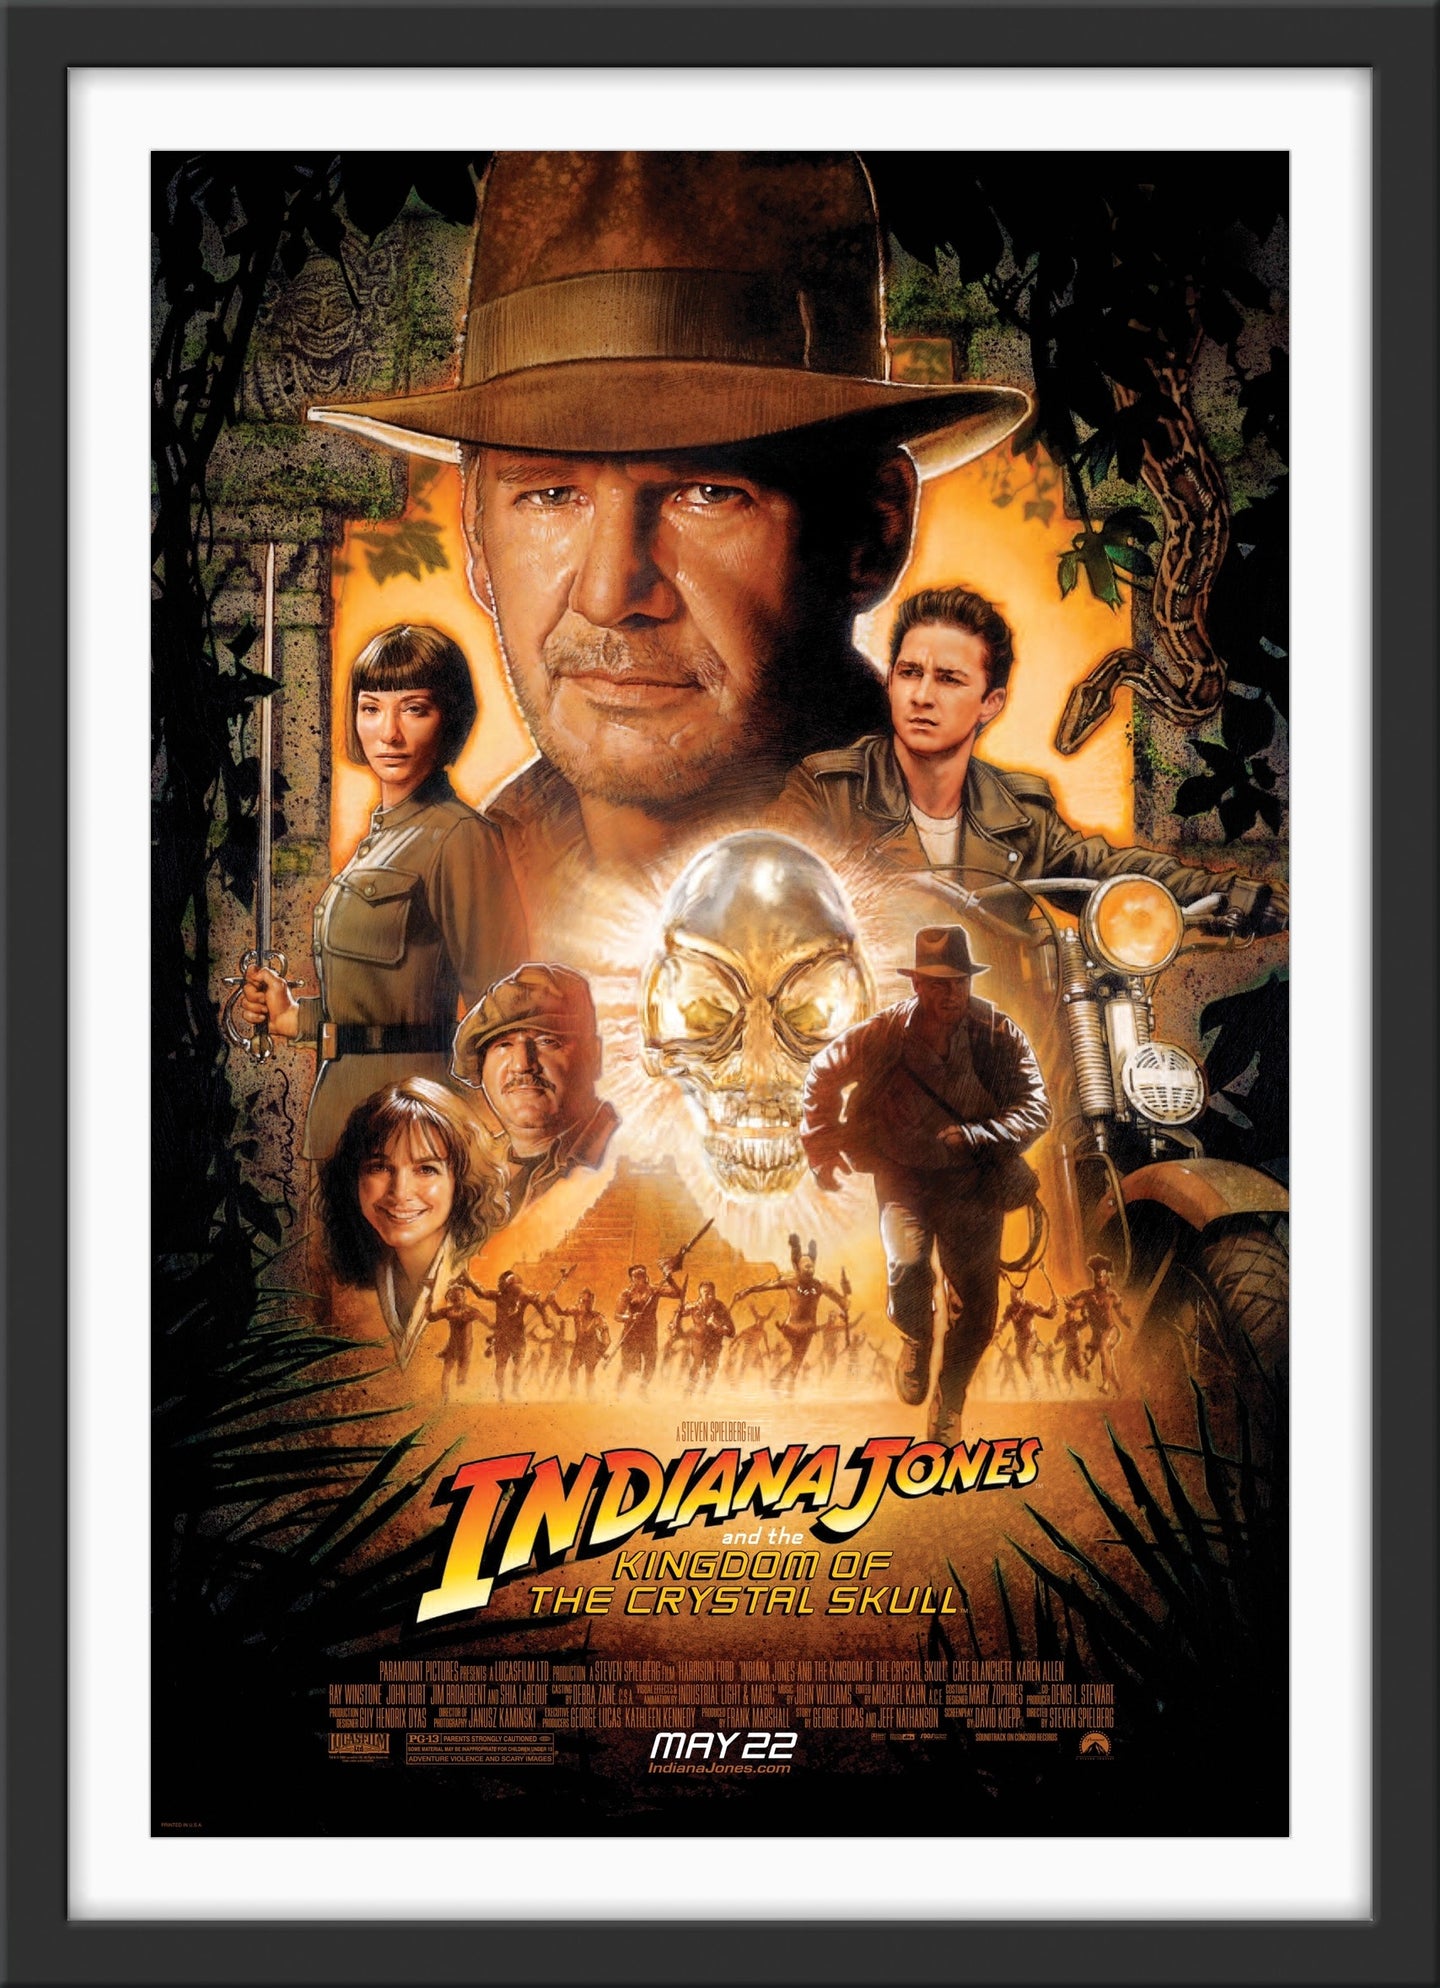 An original movie poster for the film Indiana Jones and the Kingdom of the Crystal Skull